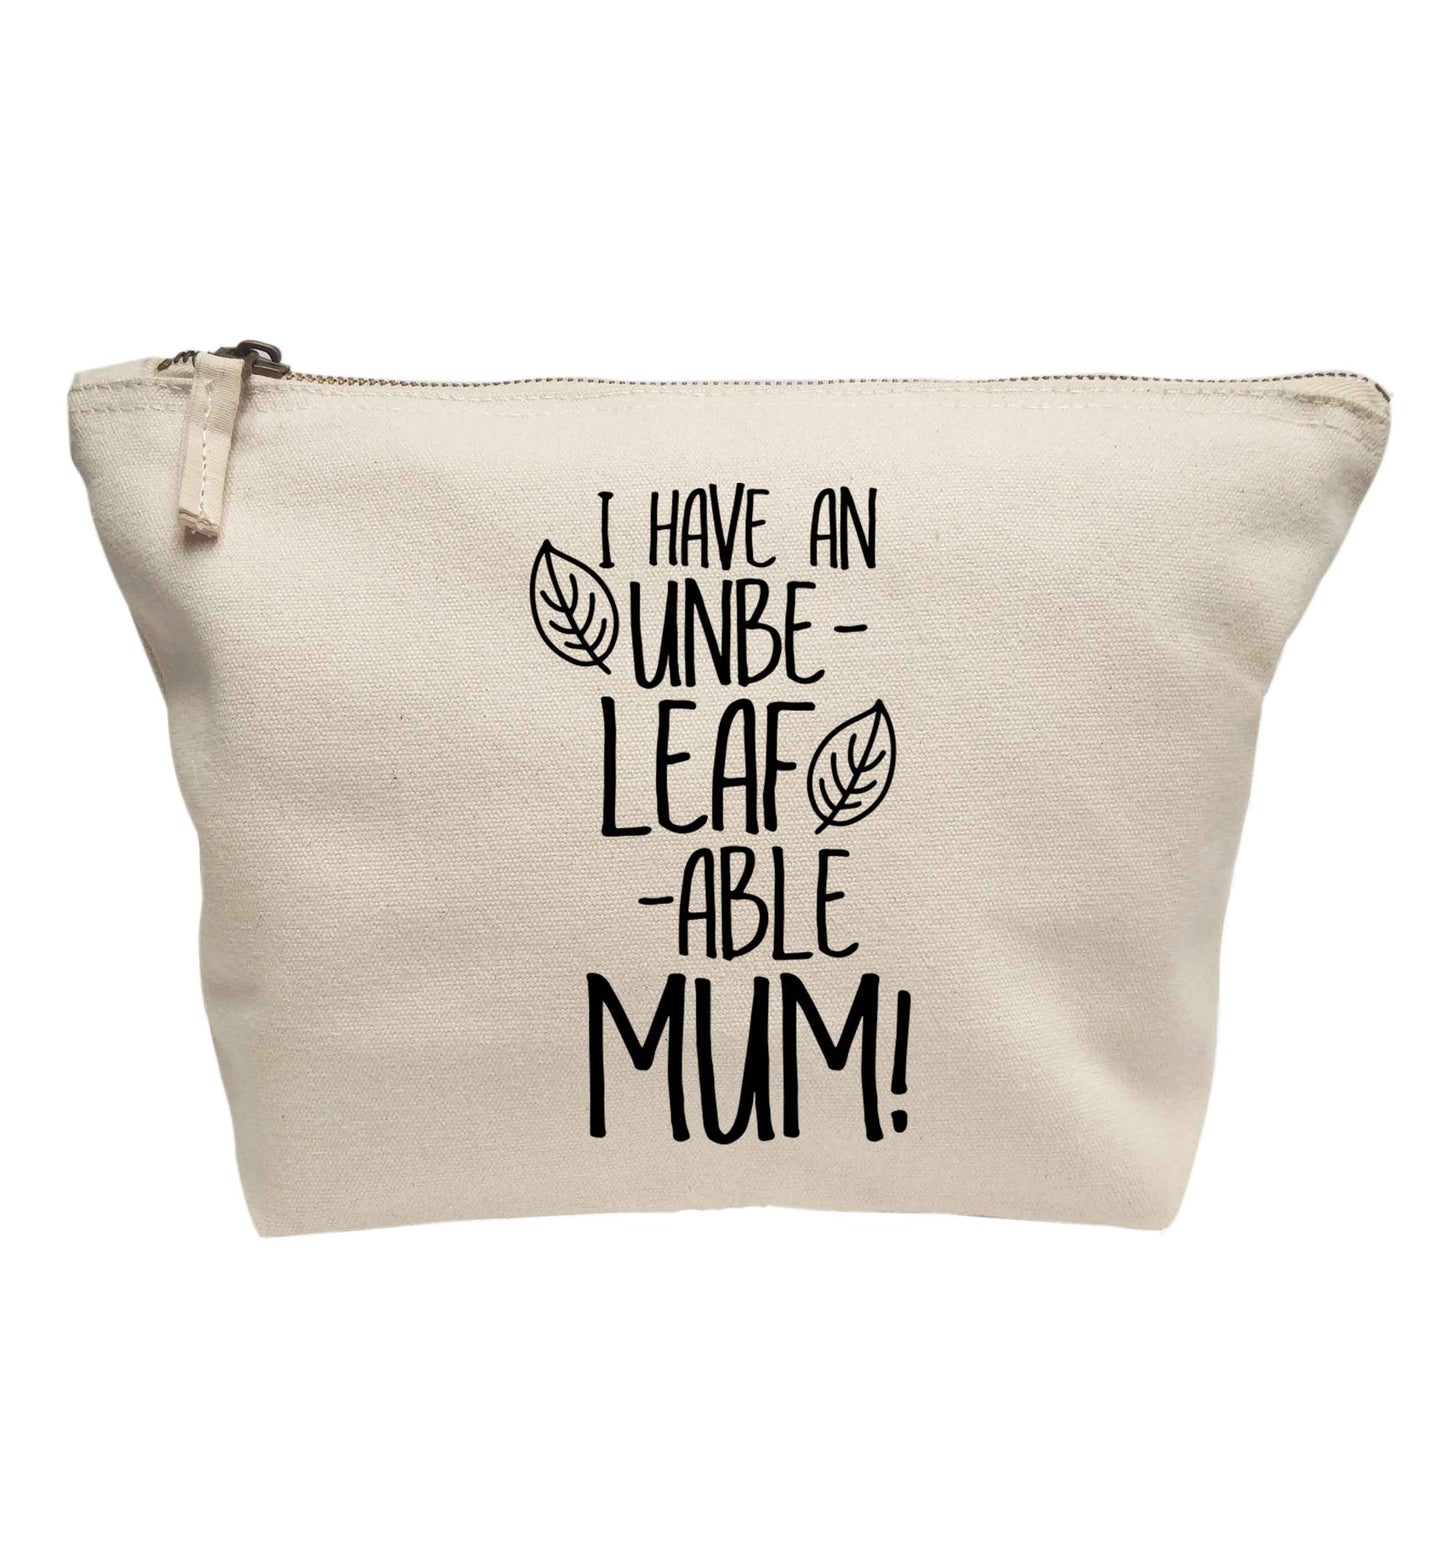 I have an unbeleafable mum! | Makeup / wash bag